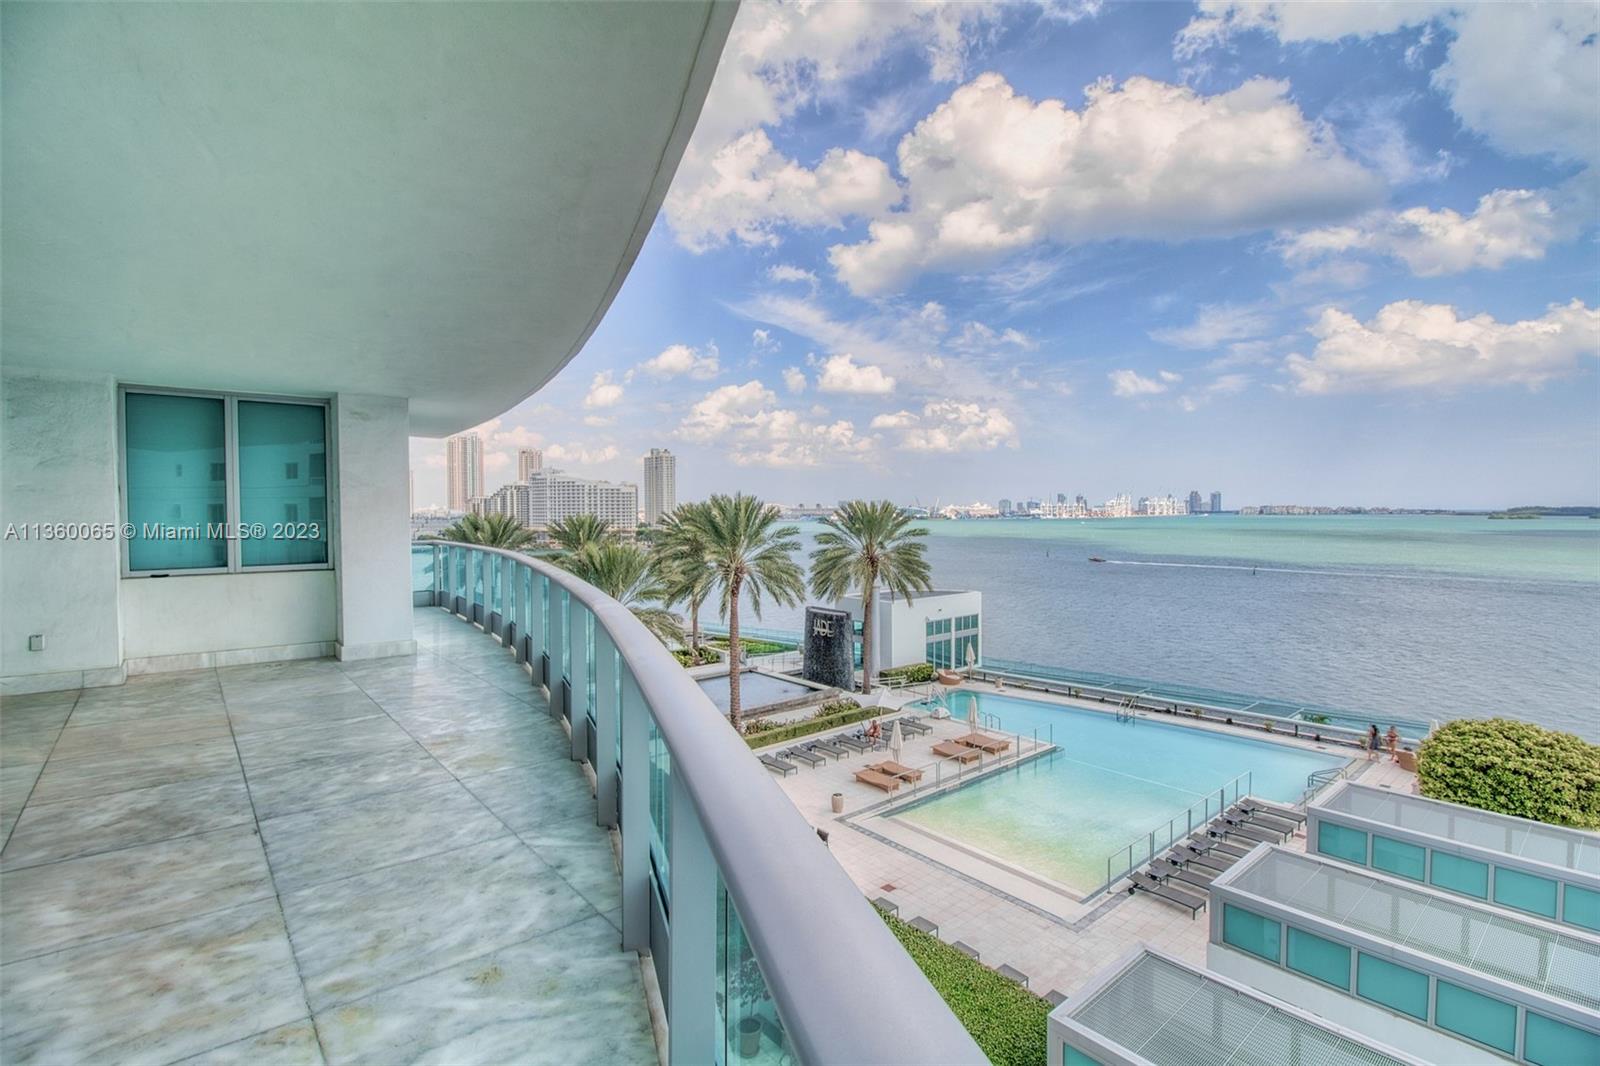 Live limitlessly in the premier South, South East corner 2 bed/ 2.5 bath at Jade Brickell with 3 parking spaces! Once you enter this property through your semi-private elevator, the corner-glass windows bring in beautiful natural light and offers dramatic views of Biscayne Bay! 1,878SF of desired open-concept living offers plenty of flexibility to wine-and-dine or simply watch the sunset fade from every room. Each spacious bedroom features a relaxing en-suite bathroom and offers plenty of closet and storage space. This sophisticated, stylish condo features 36' Calcutta Marble flooring throughout, Subzero and Miele appliances, white Italian cabinets, rain shower and jacuzzi tub. Located in Brickell’s epicenter for swanky shopping.